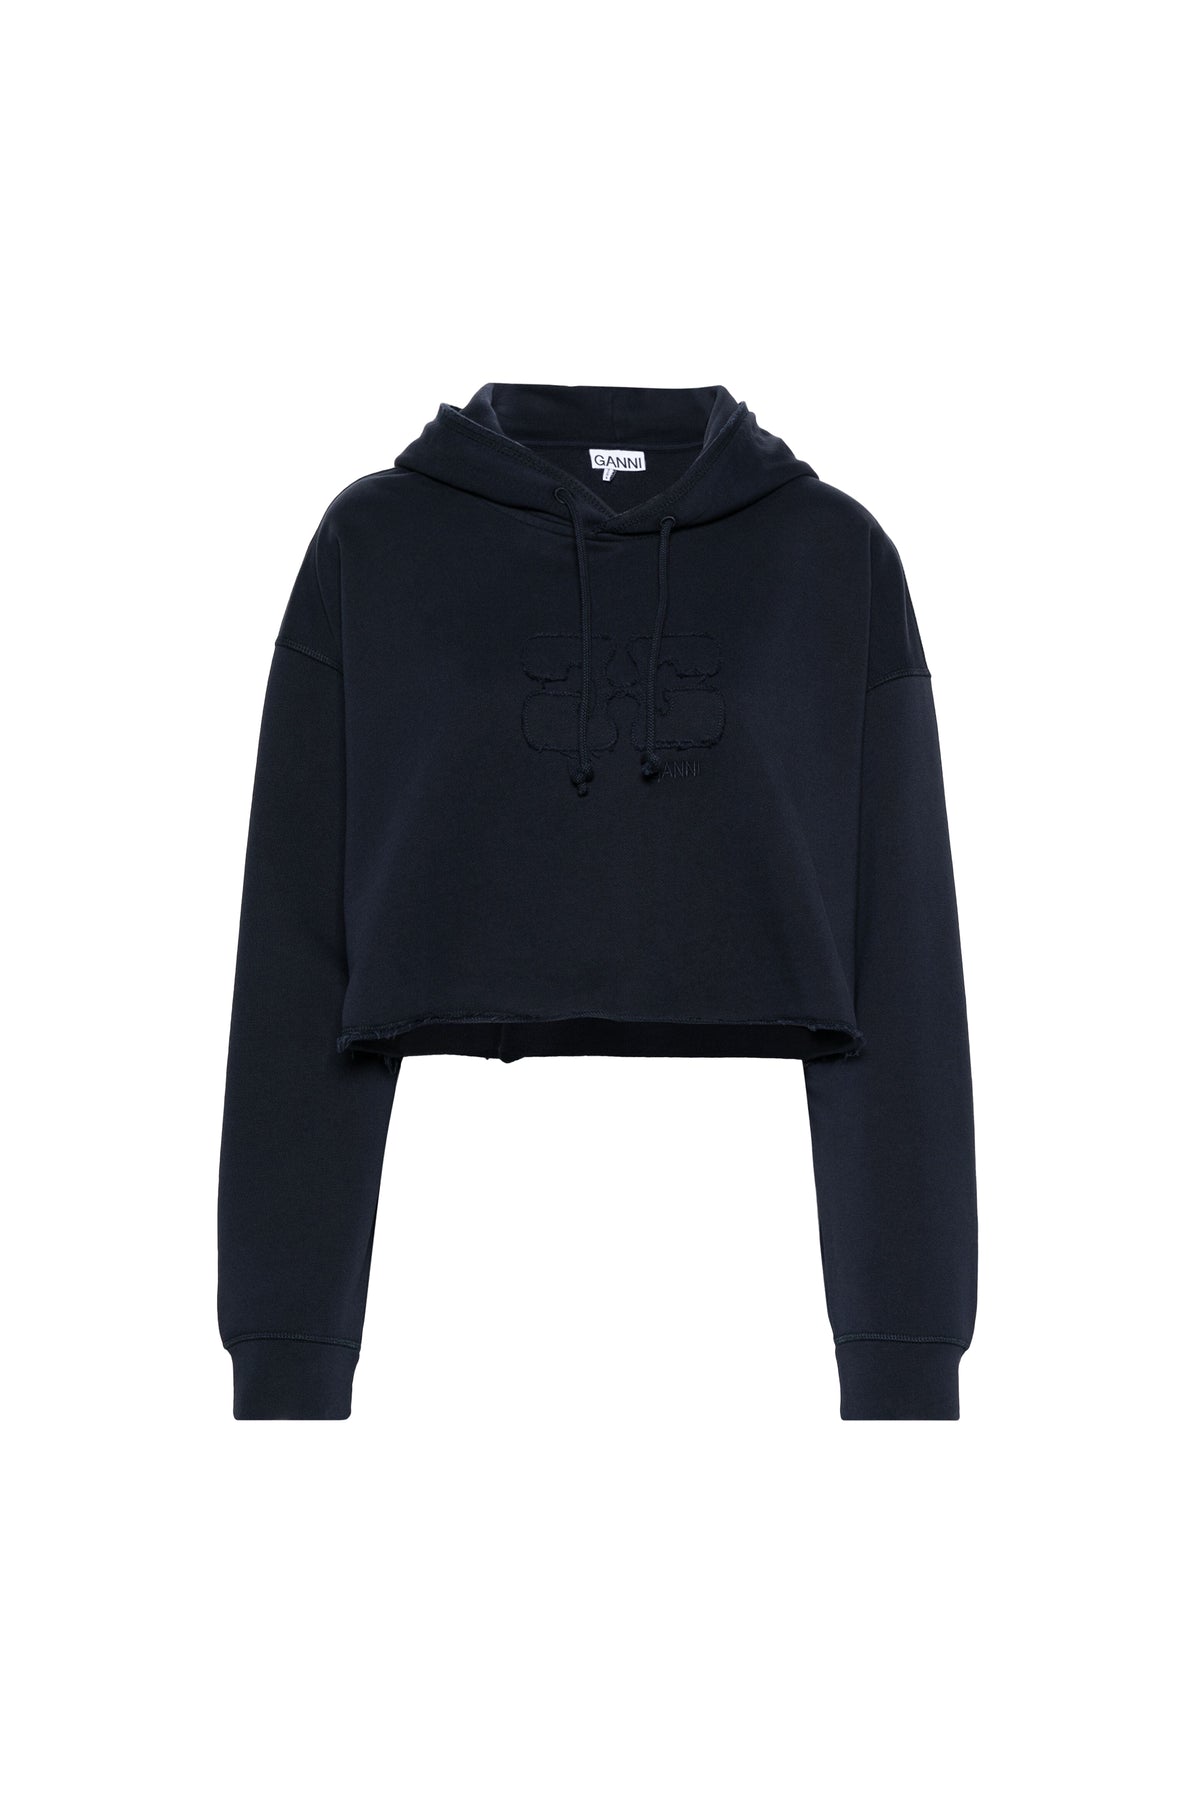 CROPPED OVERSIZED HOODIE / NVY